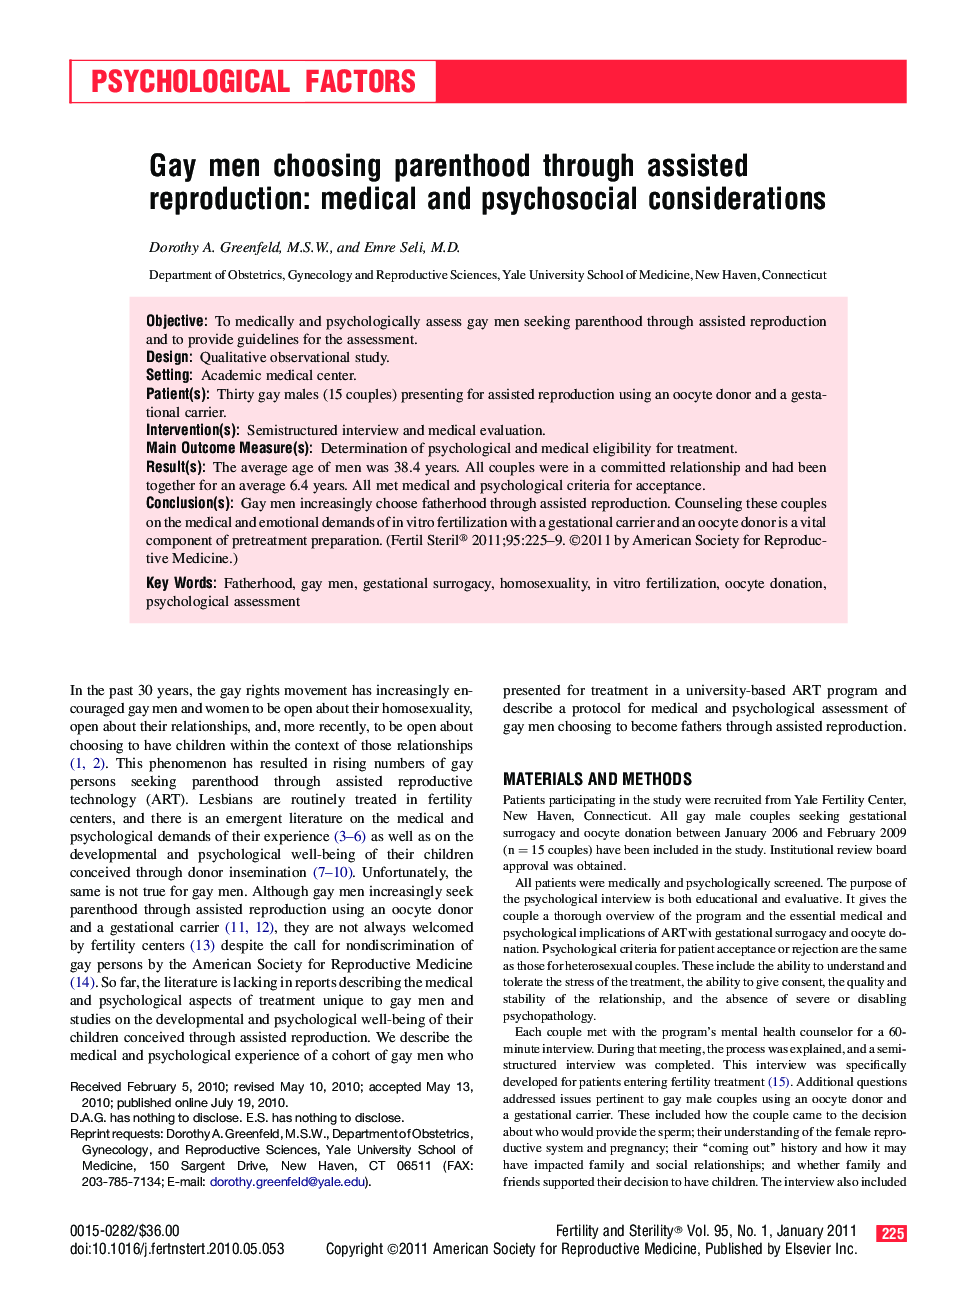 Gay men choosing parenthood through assisted reproduction: medical and psychosocial considerations 